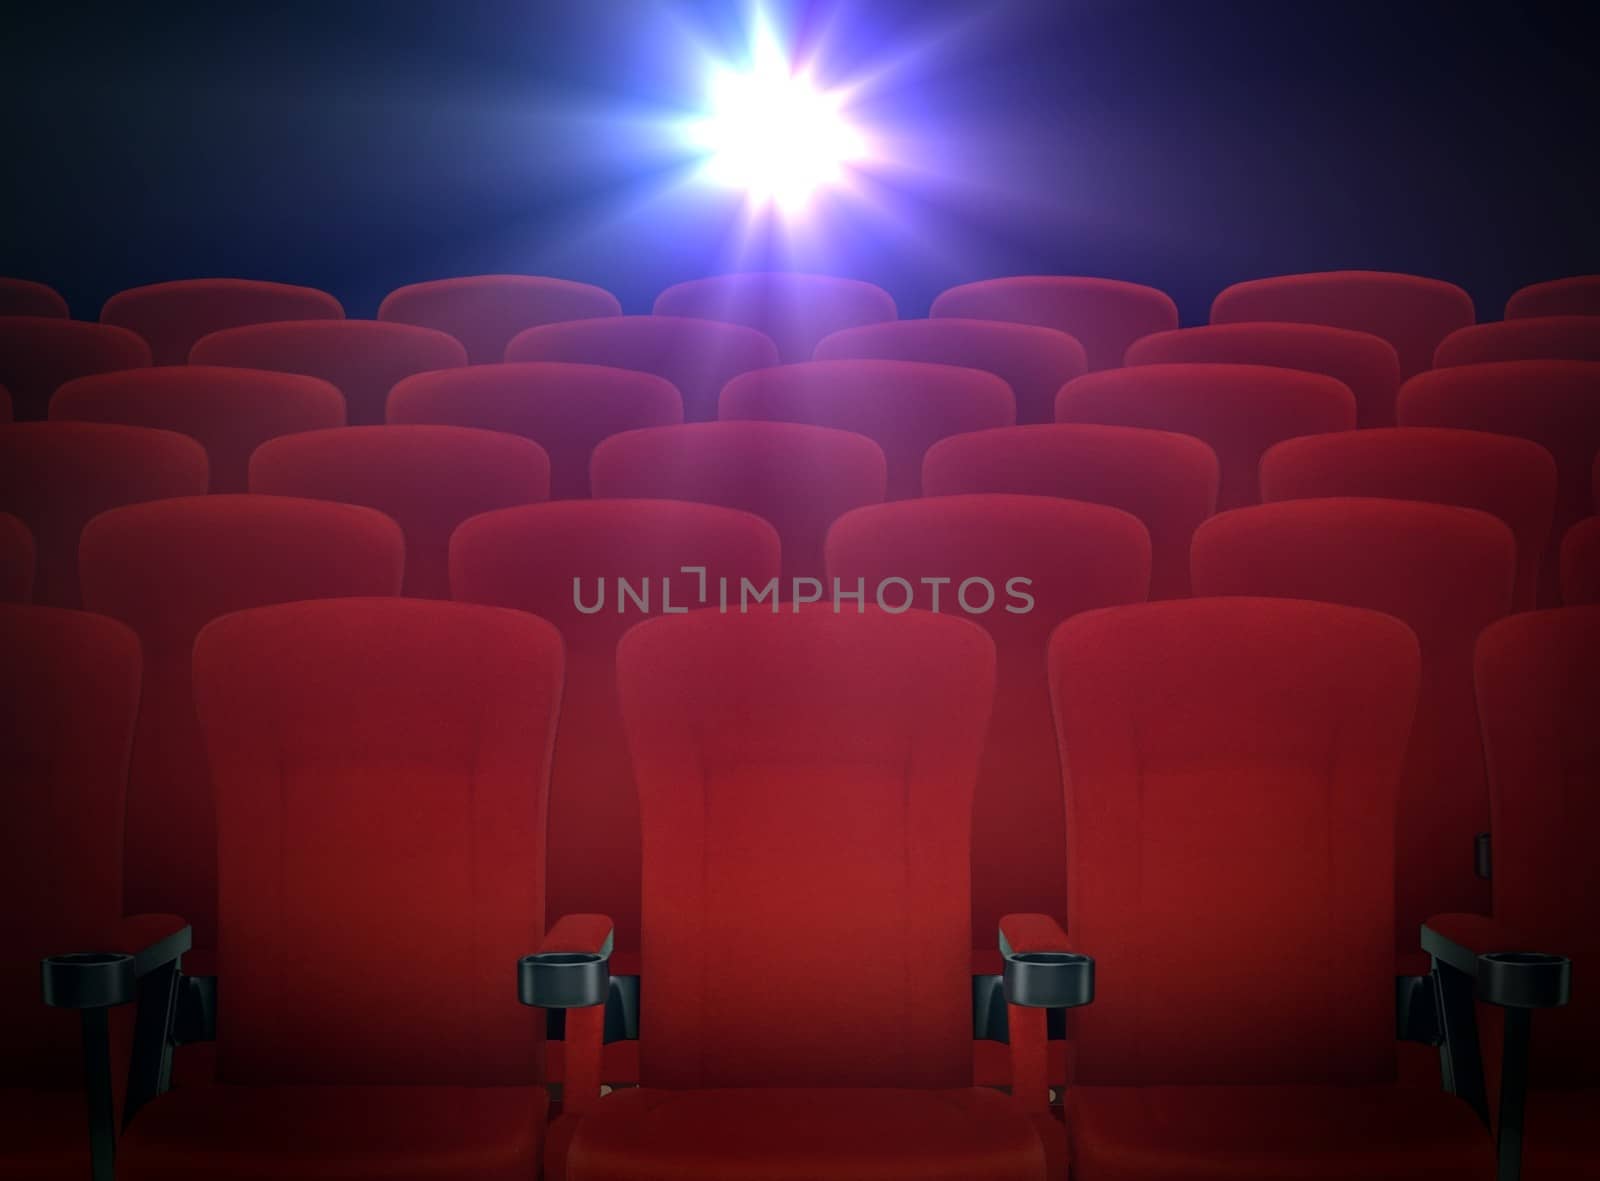 Cinema Red Seats with Projector Lights